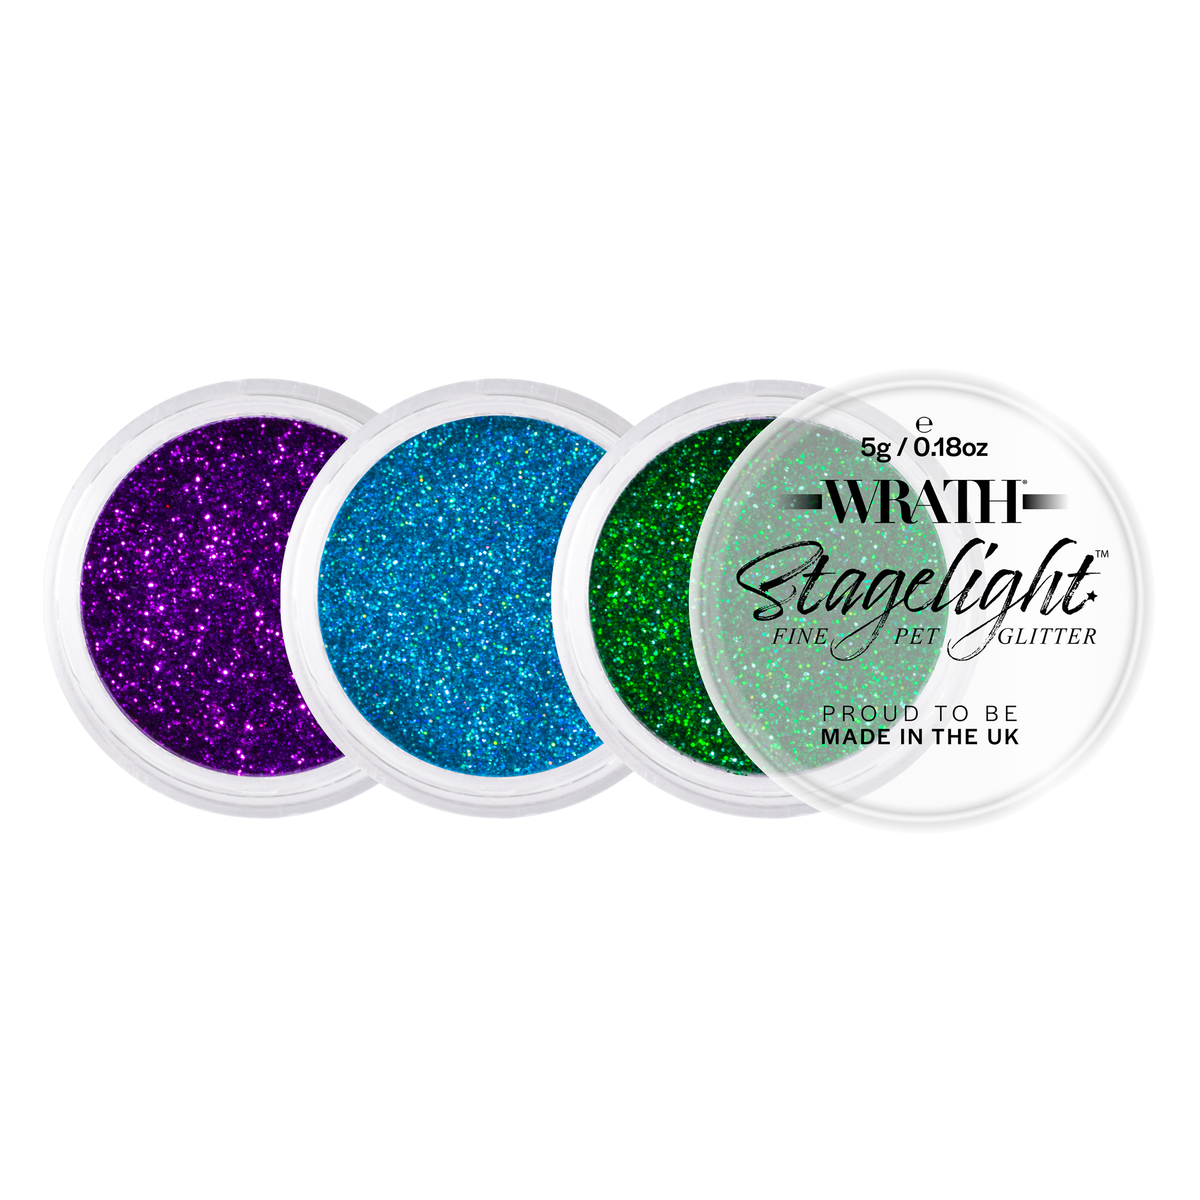 WRATH Stagelight Loose Fine Glitter - Professional Makeup - Red Carpet FX